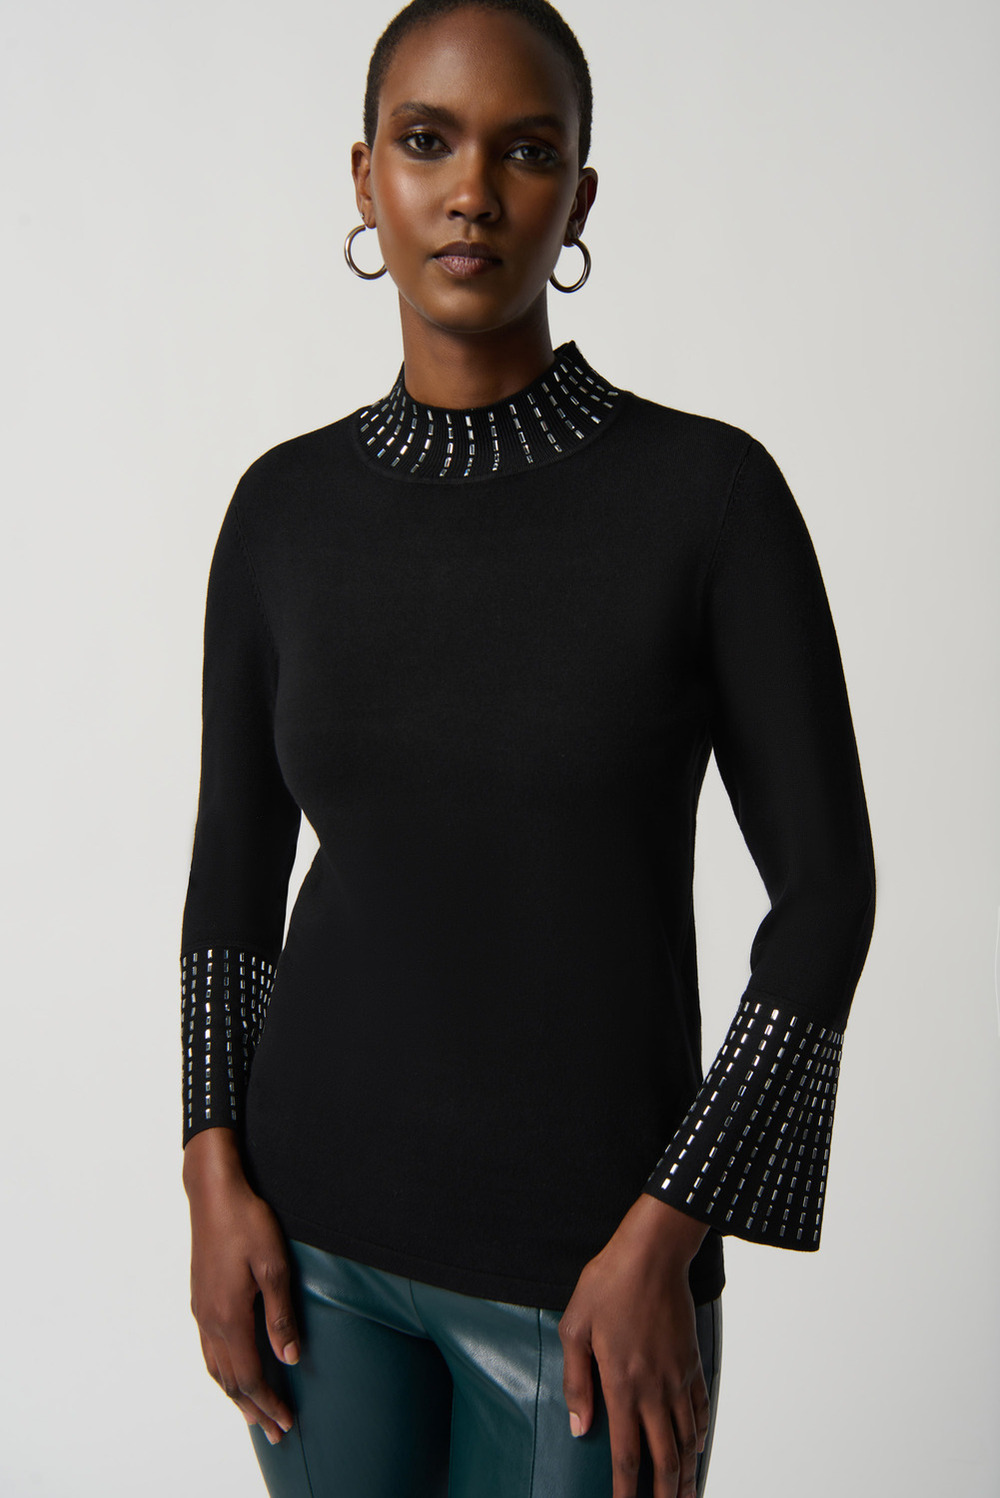 Beaded Detail Sweater Style 234920. Black